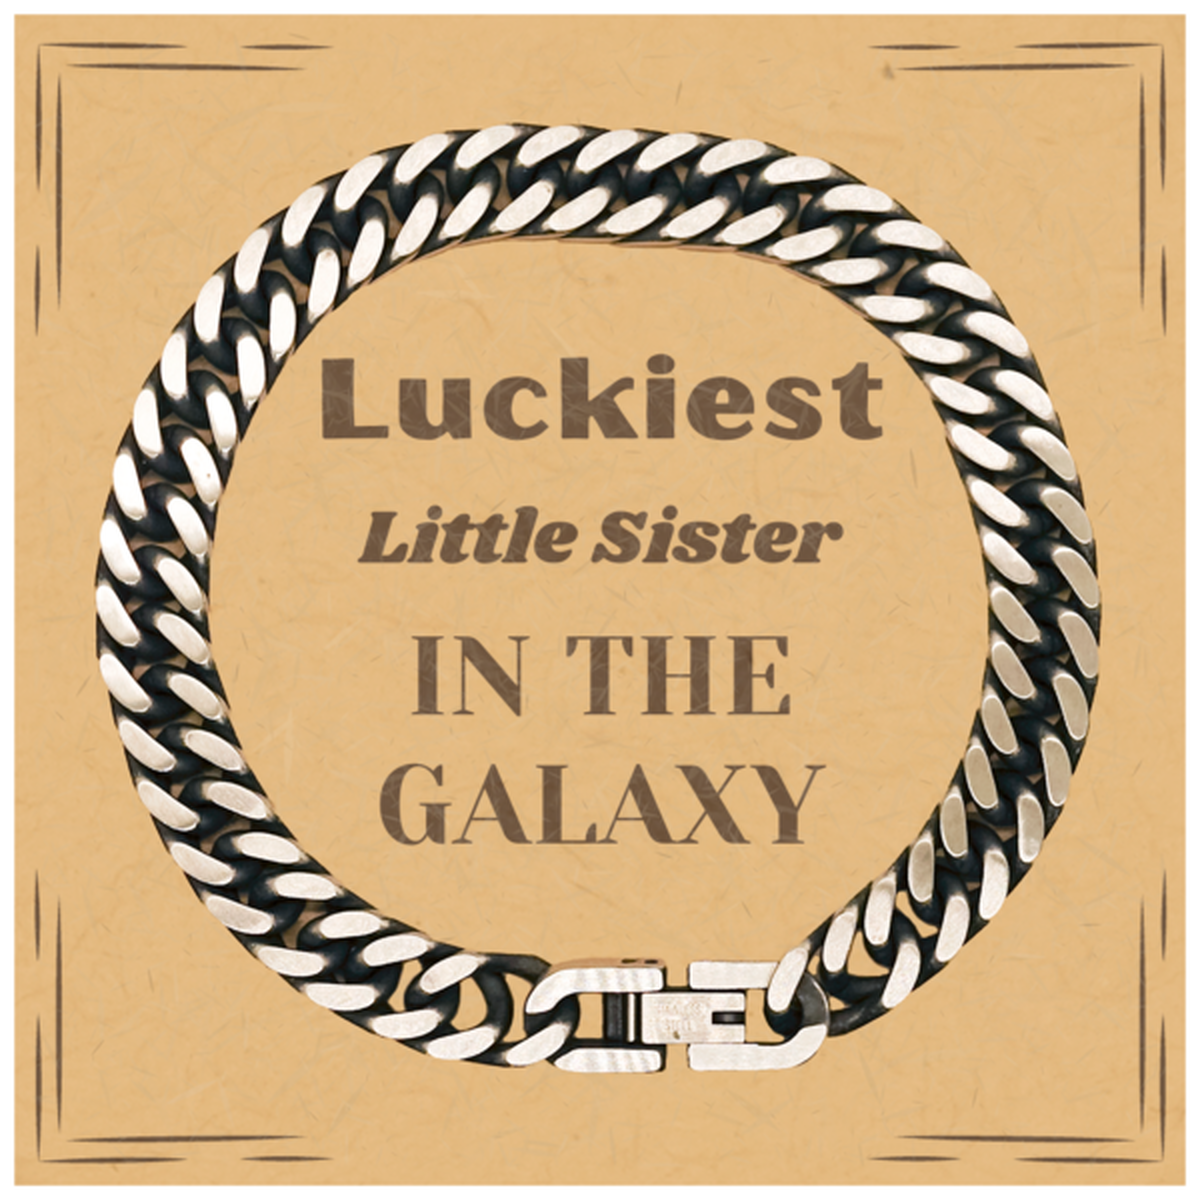 Luckiest Little Sister in the Galaxy, To My Little Sister Message Card Gifts, Christmas Little Sister Cuban Link Chain Bracelet Gifts, X-mas Birthday Unique Gifts For Little Sister Men Women